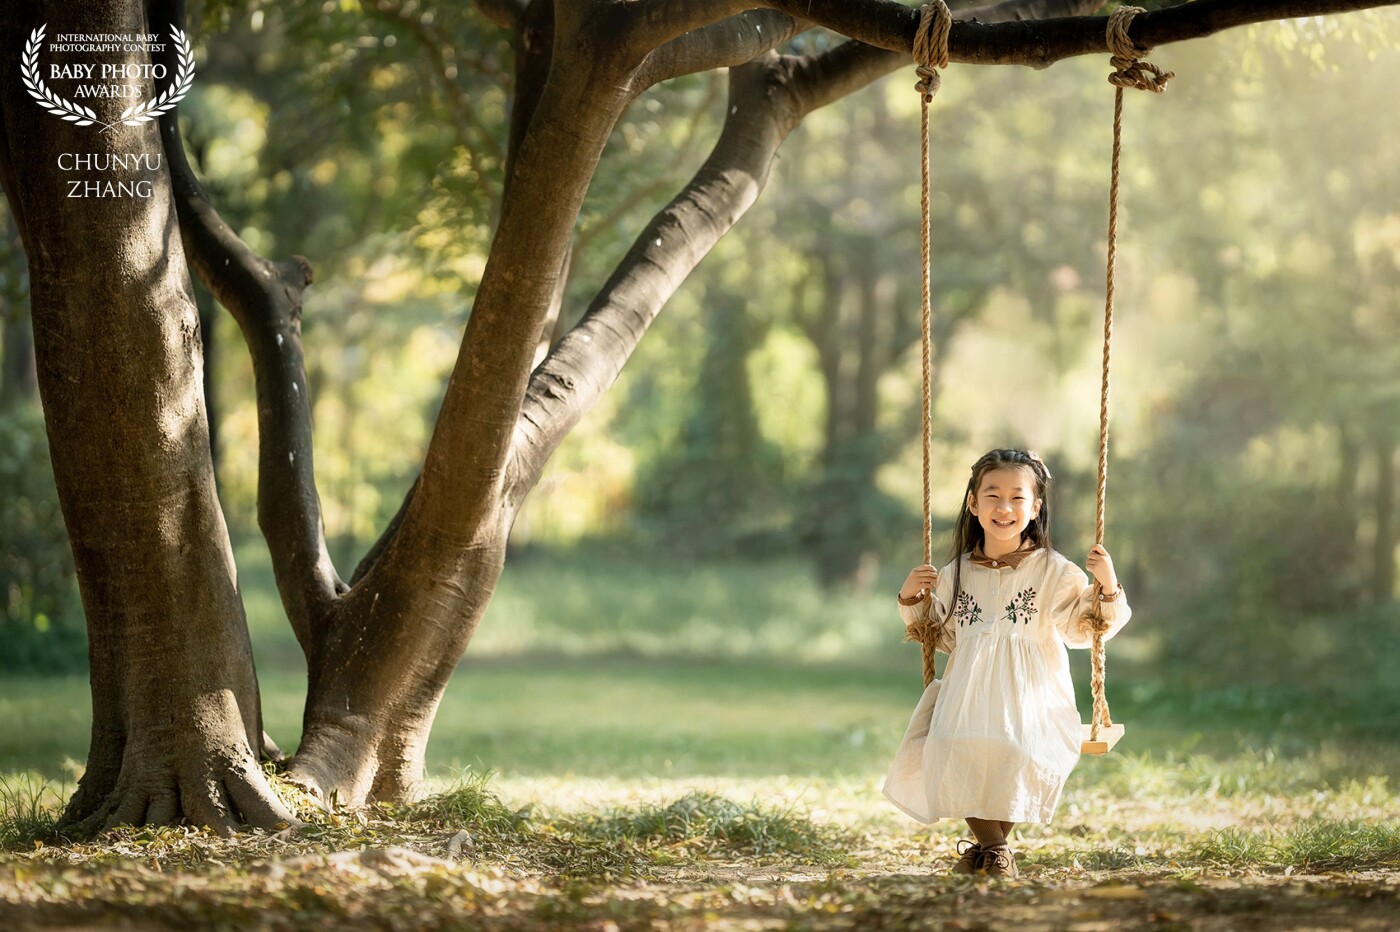 Today a cute little girl came under the big tree, she was swinging, the autumn sun was shining warmly on her, the picture was really beautiful